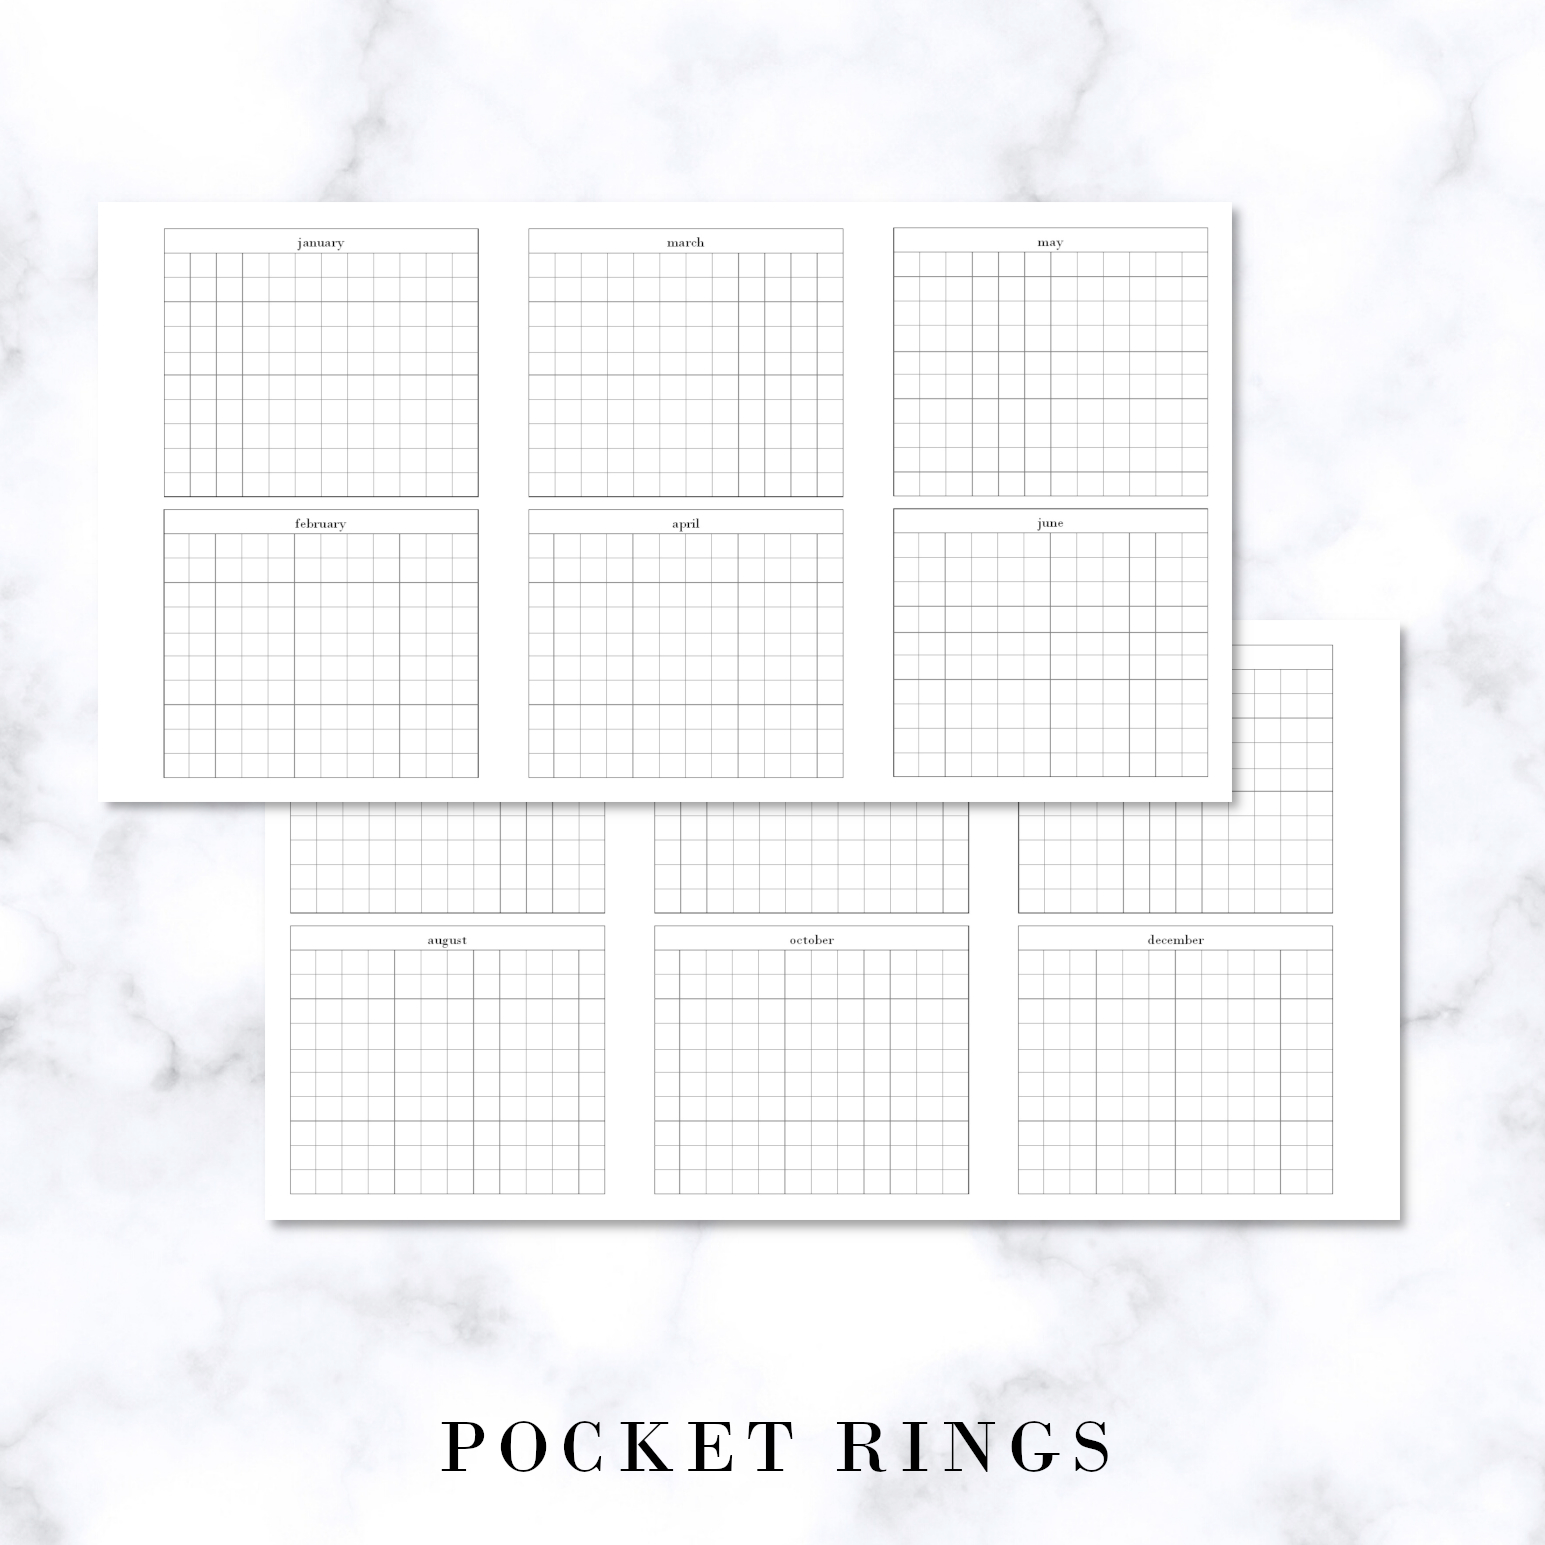 Free Planner Printable: Pocket Rings - Monthly Layout